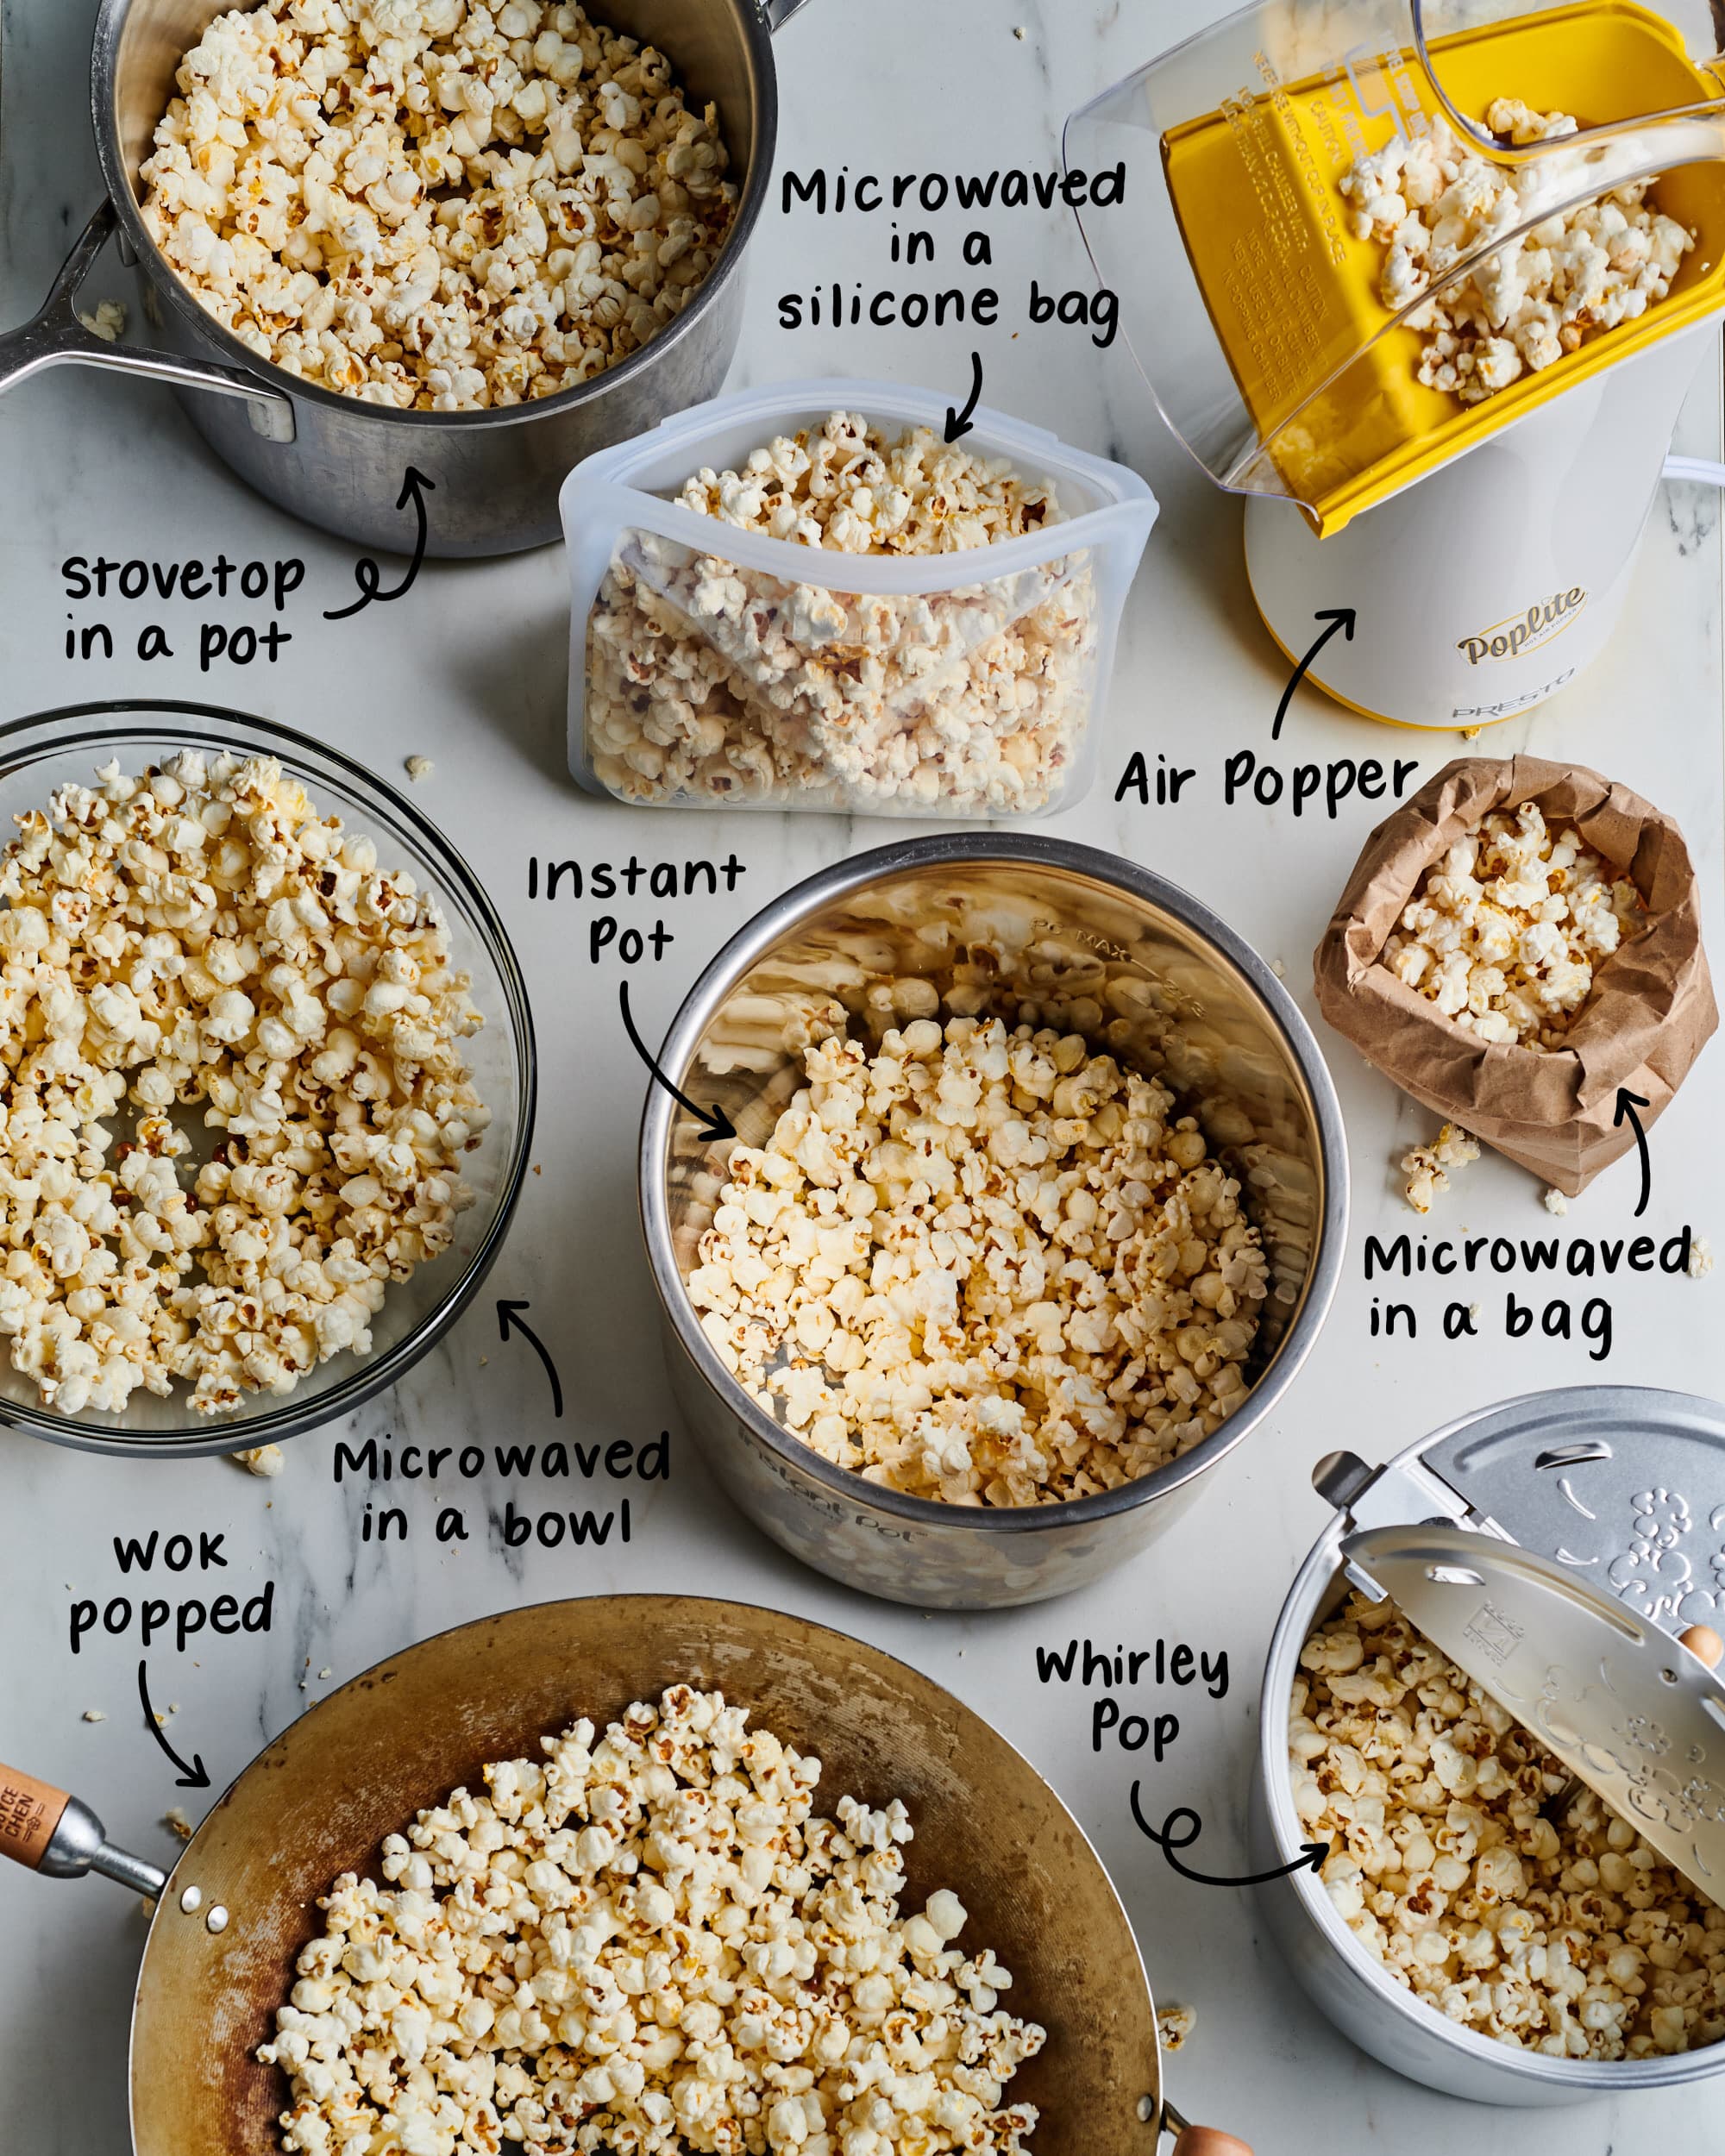 We Tried 29 Methods for Popping Popcorn at Home And Found The Very